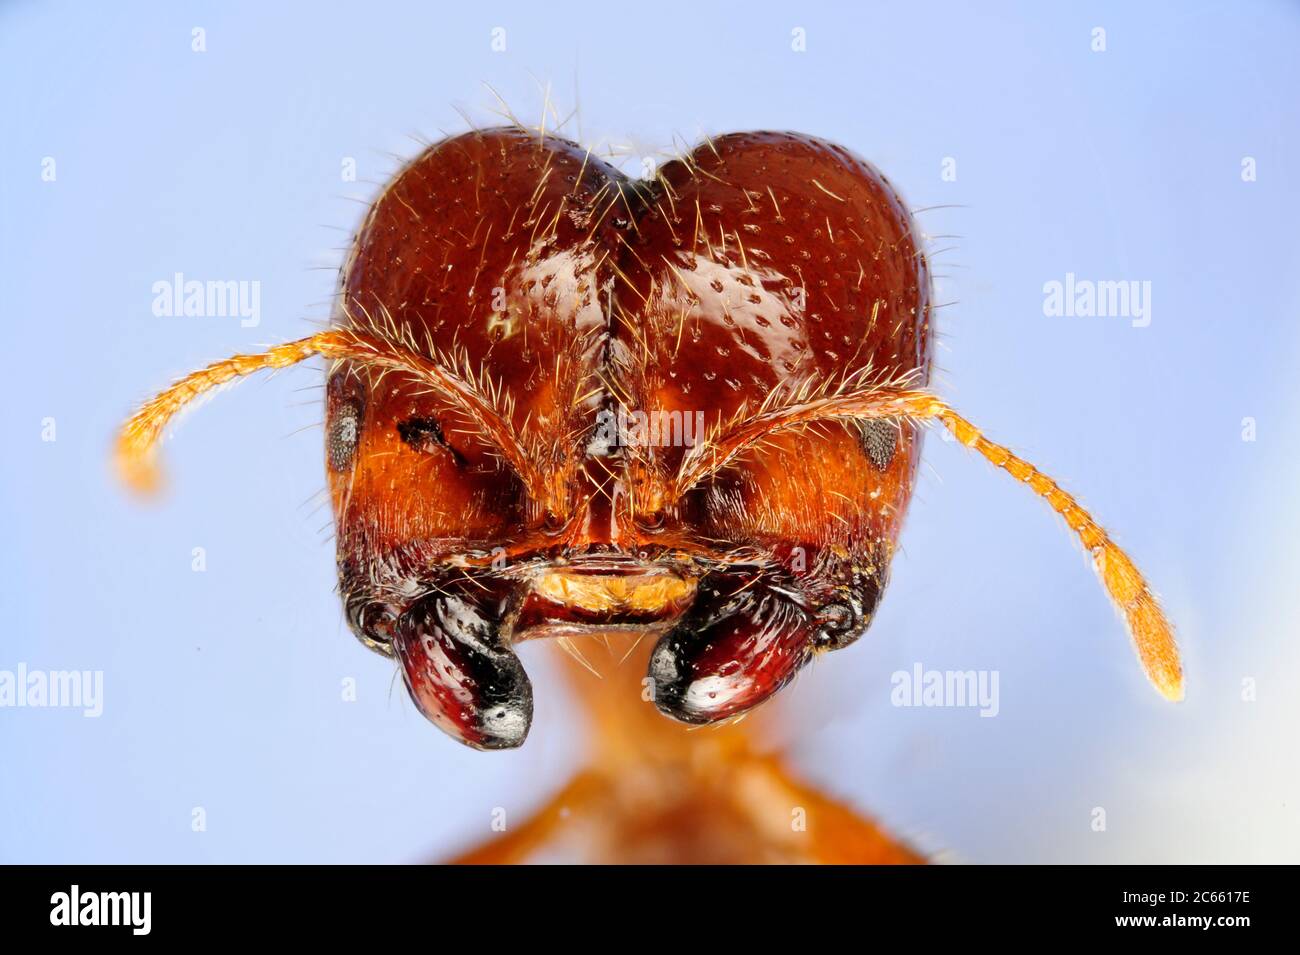 [Digital focus stacking] Ant portrait, Solenopsis geminata is one of several species that are known as fire ants, Picture was taken in cooperation with the 'Staatl. Museum für Naturkunde Karlsruhe'. Stock Photo